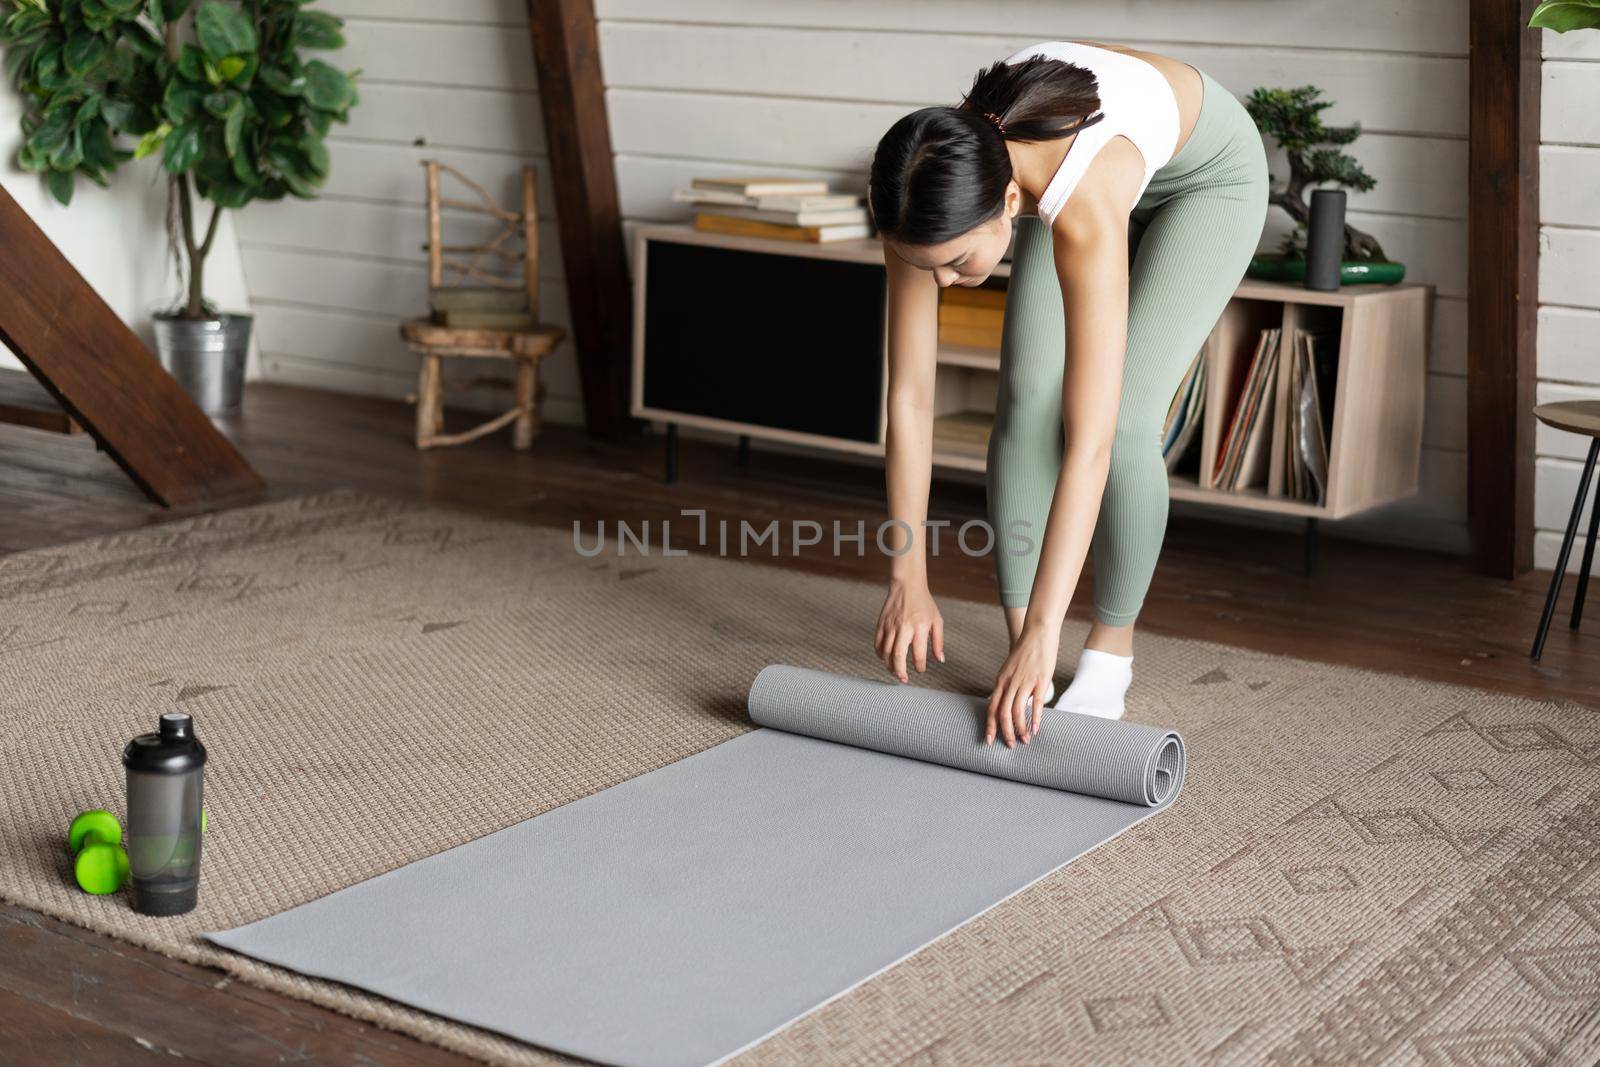 Asian fitness girl finish training,workout at home, rolling floor mat after exercises in living room.